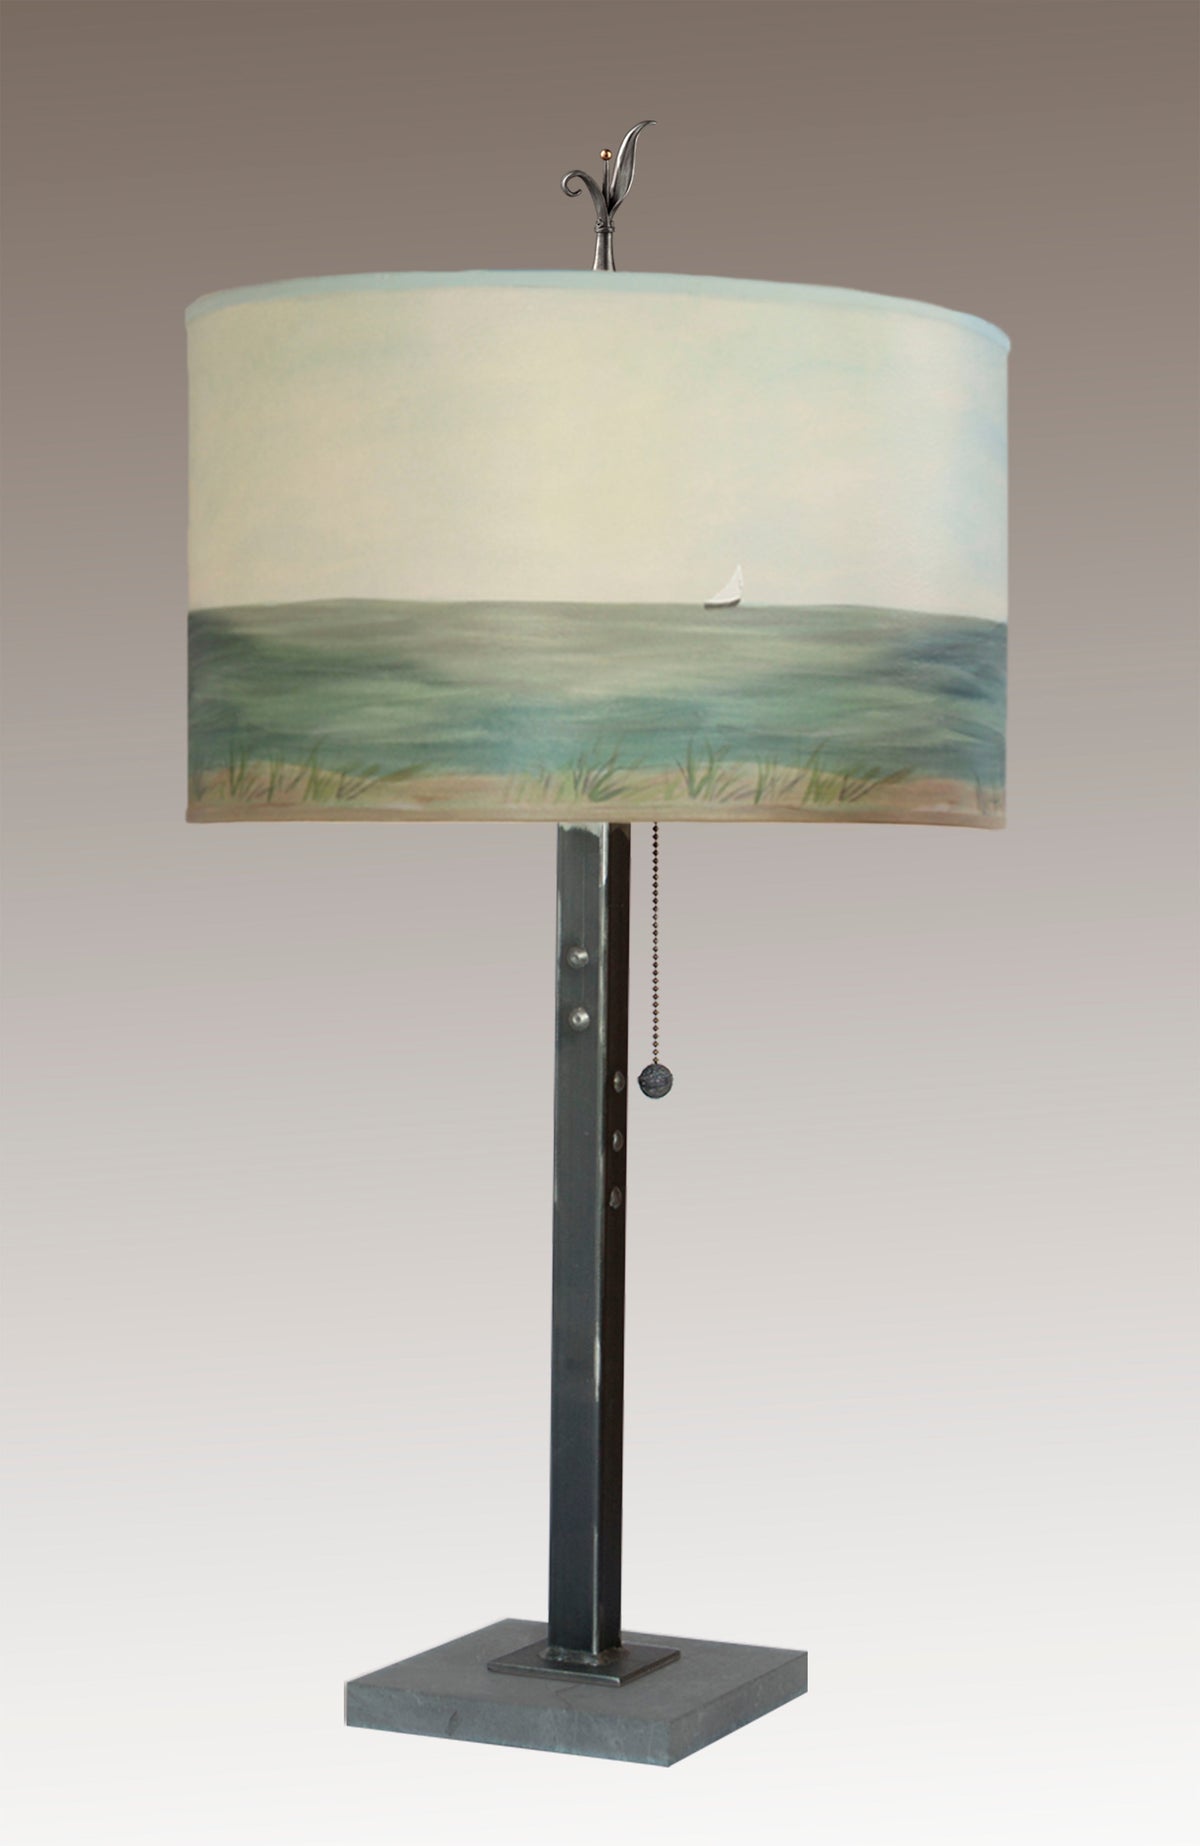 Steel Table Lamp with Large Drum Shade in Shore